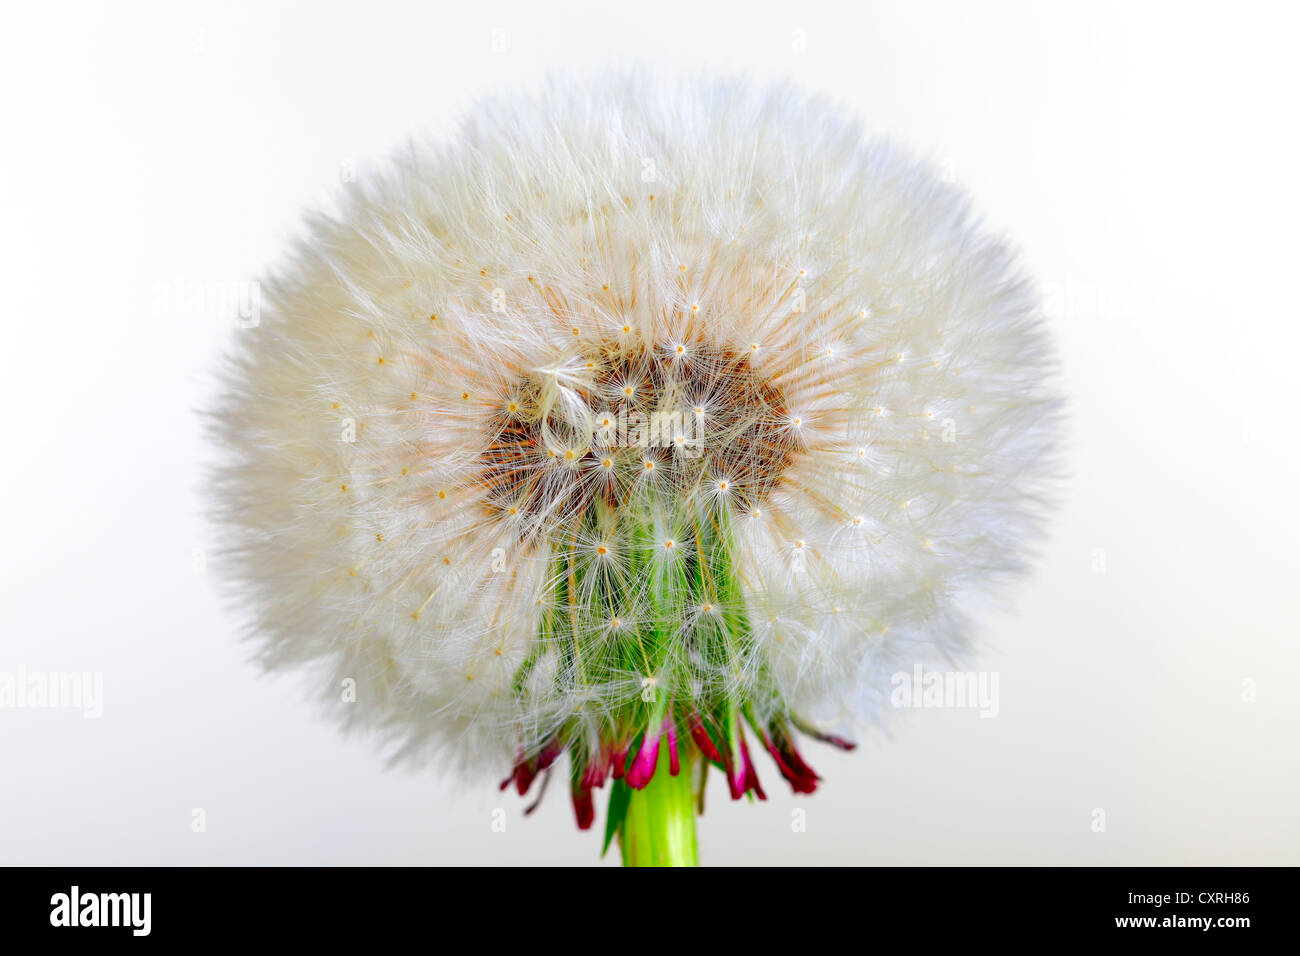 close up of a dandelion flower after blooming, studio shot Stock Photo